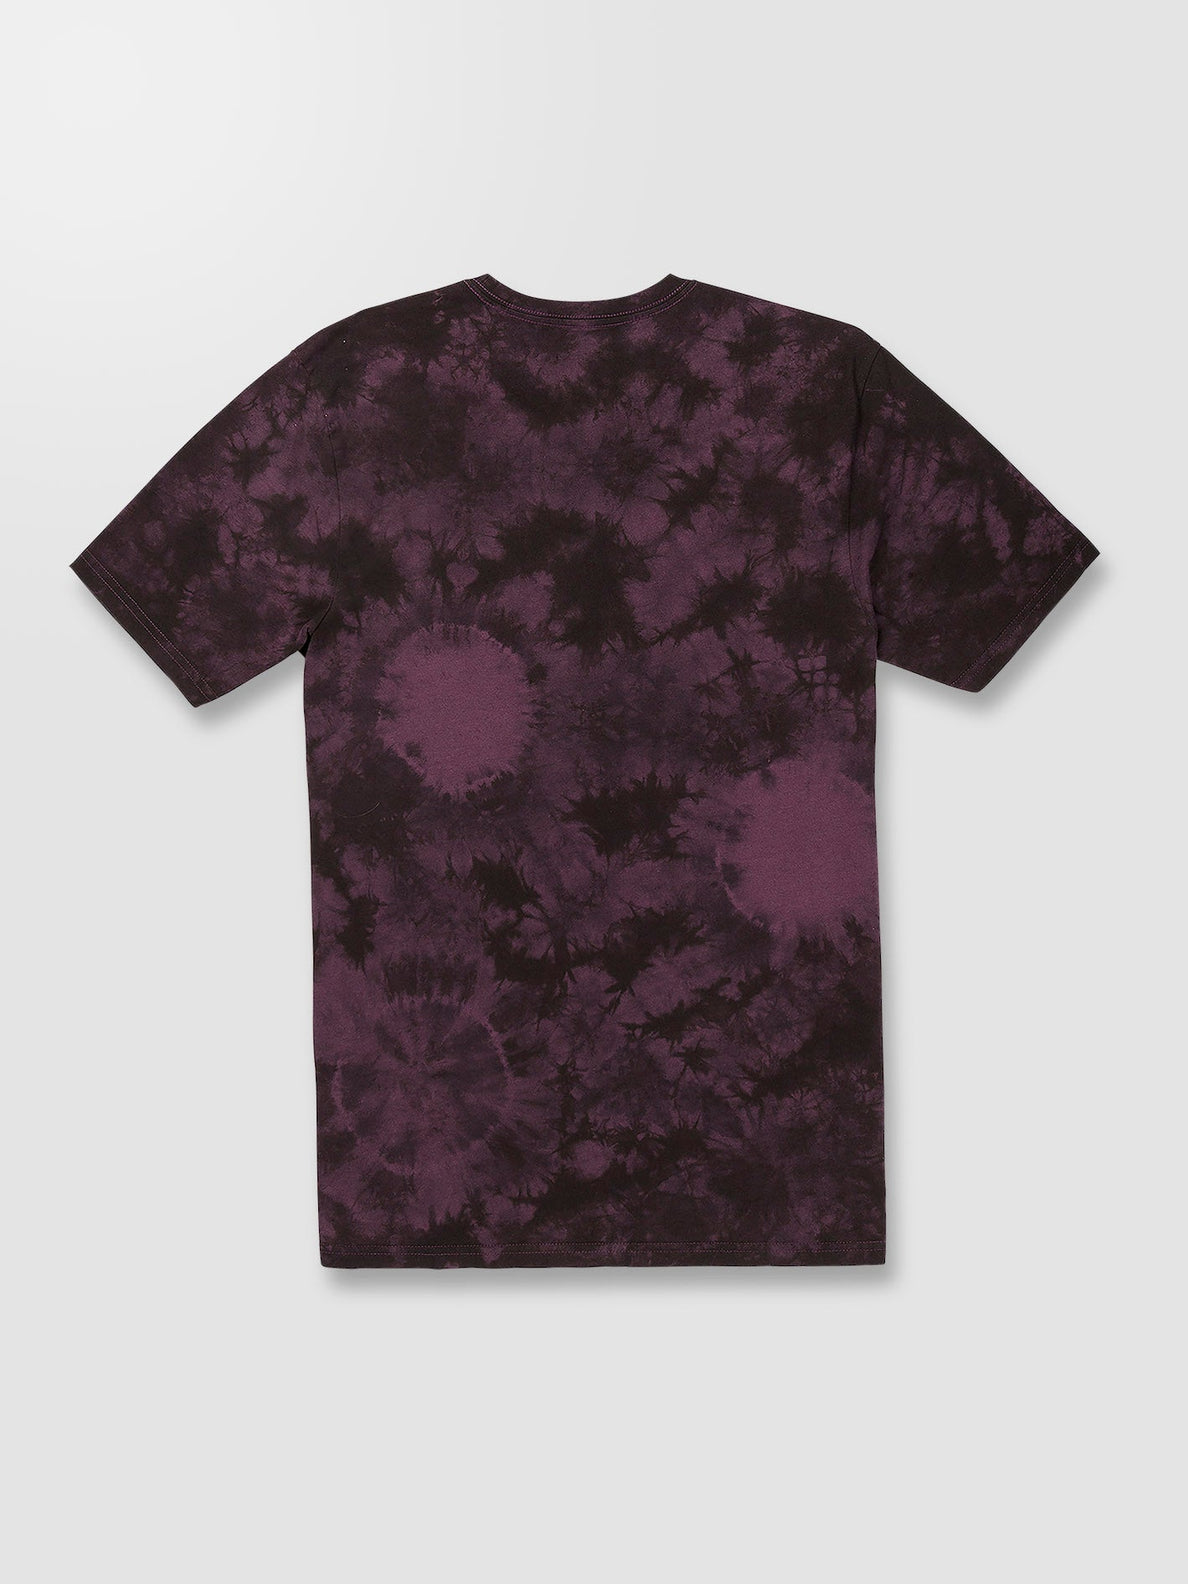 Iconic Stone T-shirt - MULBERRY (A5232200_MUL) [11]